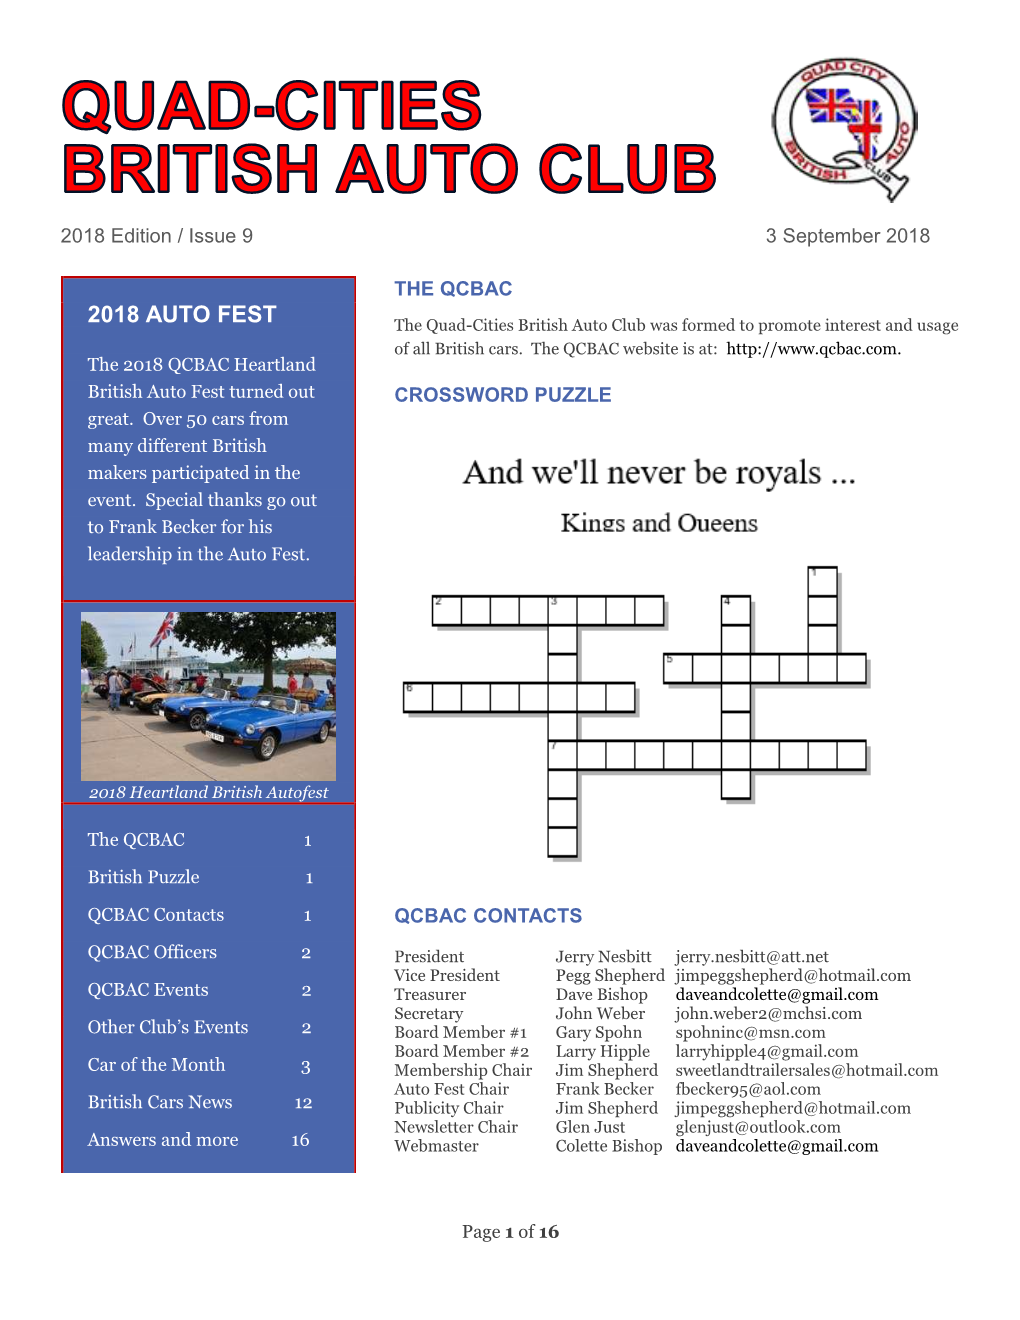 2018 AUTO FEST the Quad-Cities British Auto Club Was Formed to Promote Interest and Usage